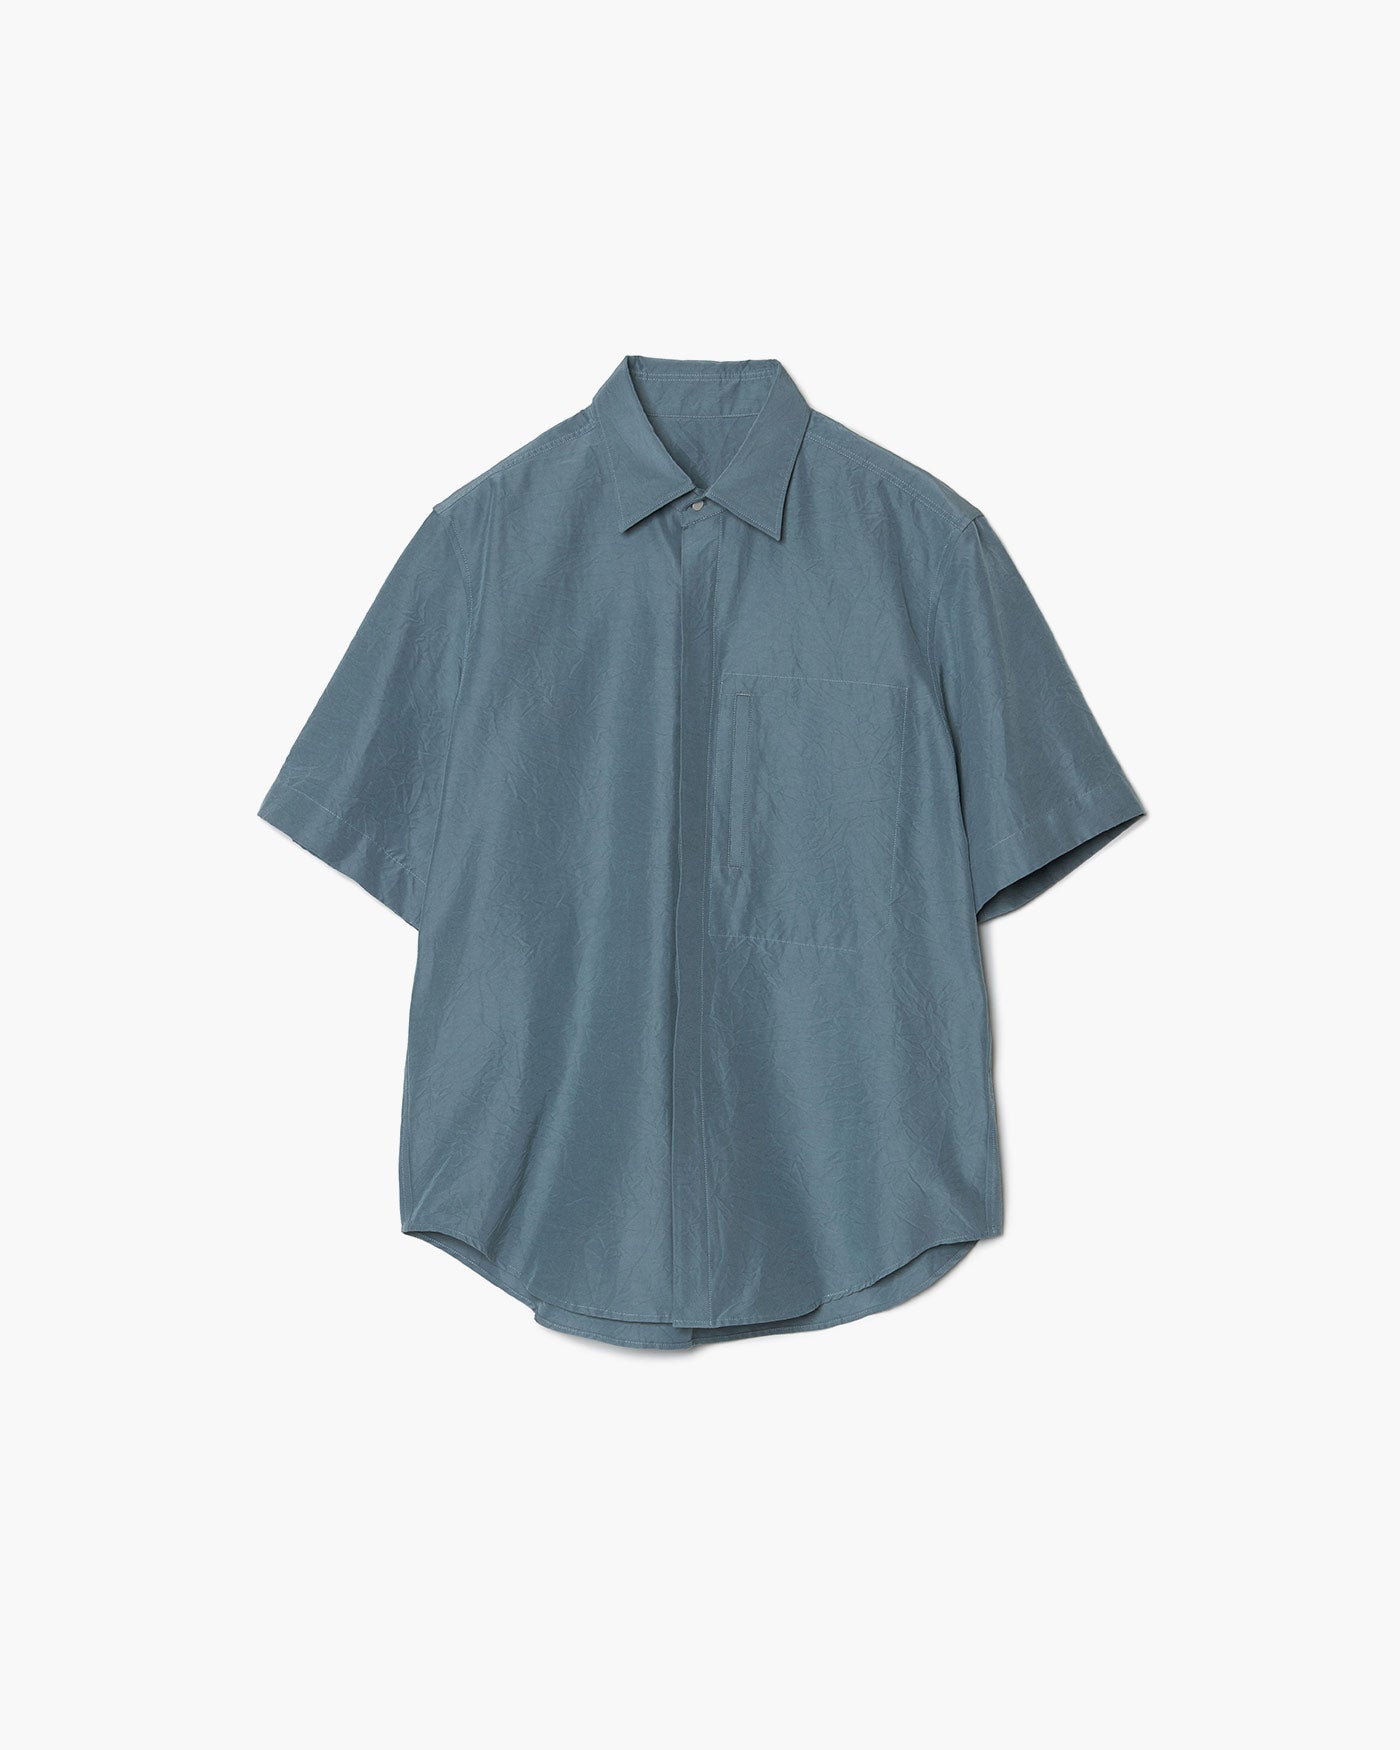 FLY FRONT SHORT-SLEEVED SHIRT